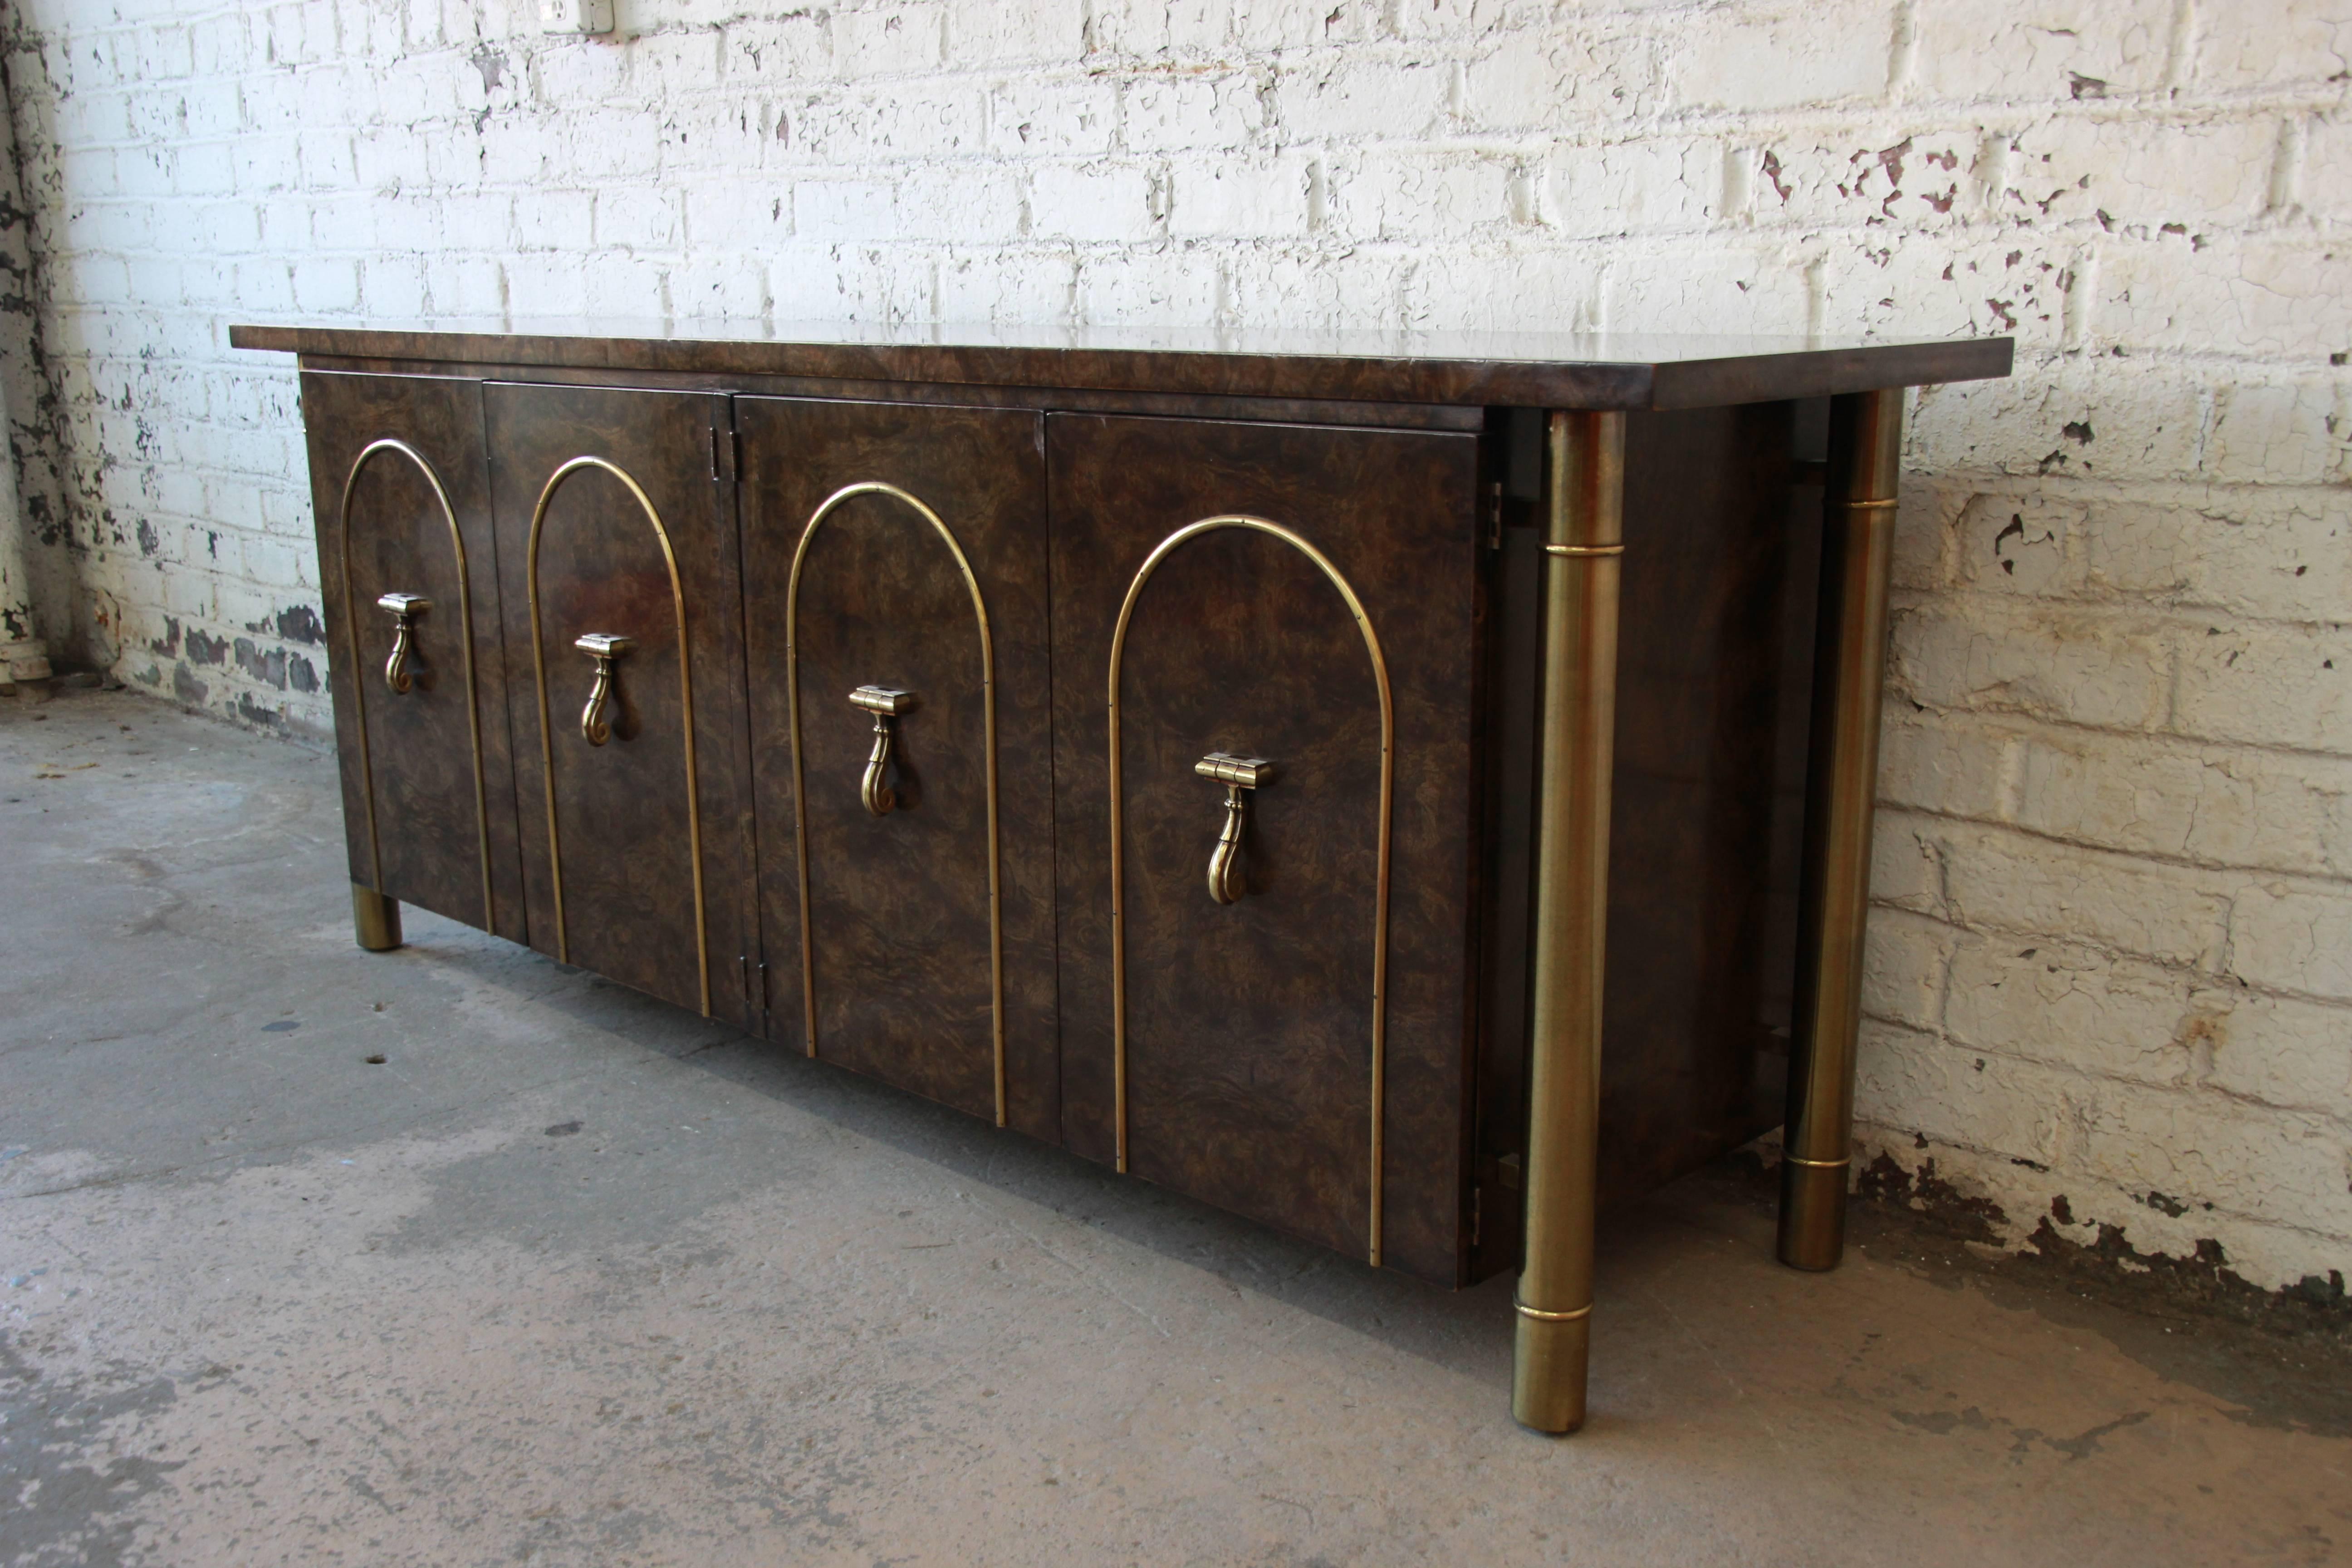 A stunning 1970s Mastercraft credenza or sideboard designed by William Doezema. The credenza features glossy dark burled Carpathian elmwood accented by brass arches and pulls on the four front doors and tall columned brass legs. Interior contains